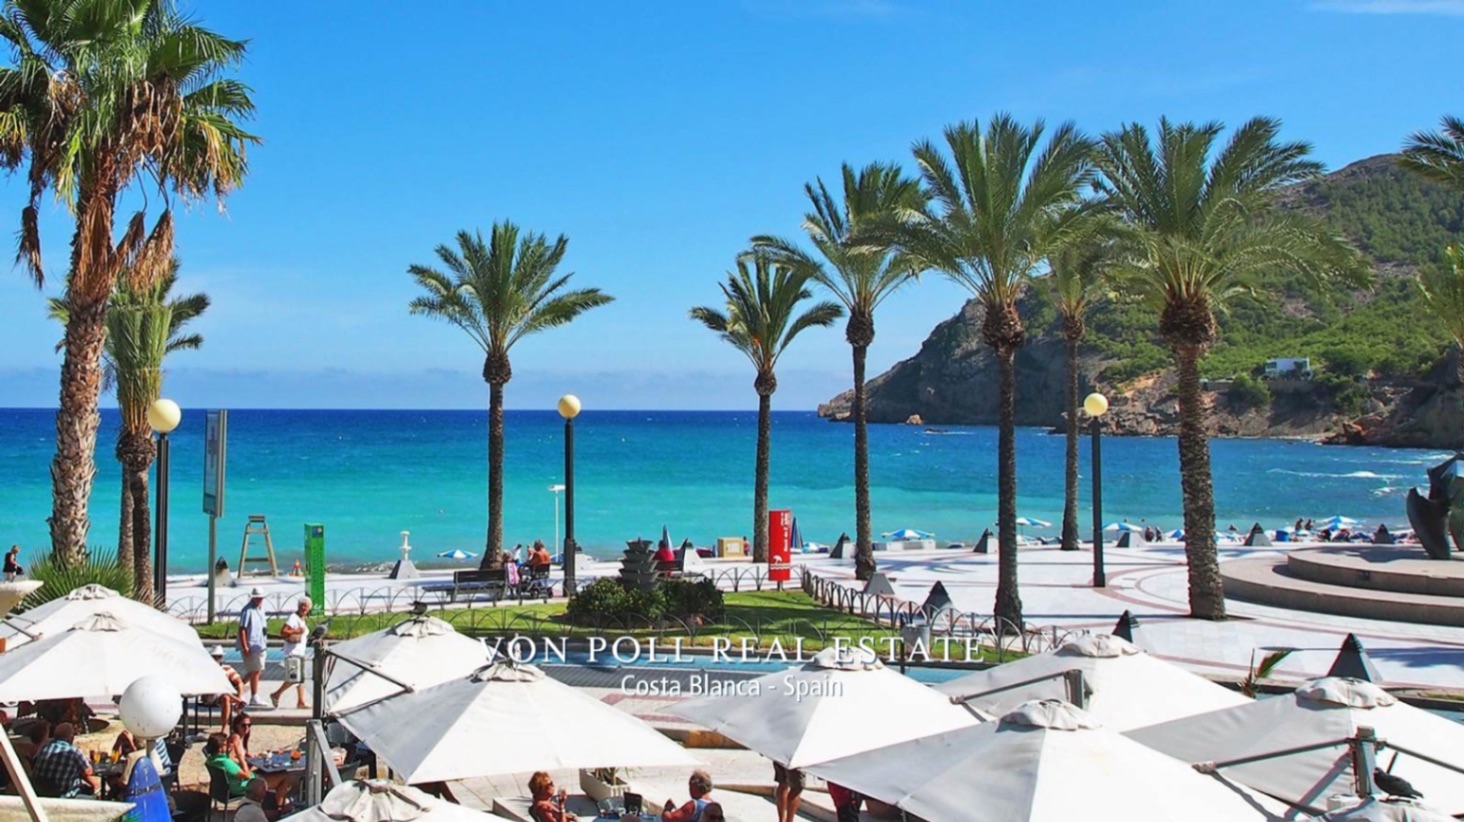 Charming Apartment in Cala Finestrat for sale